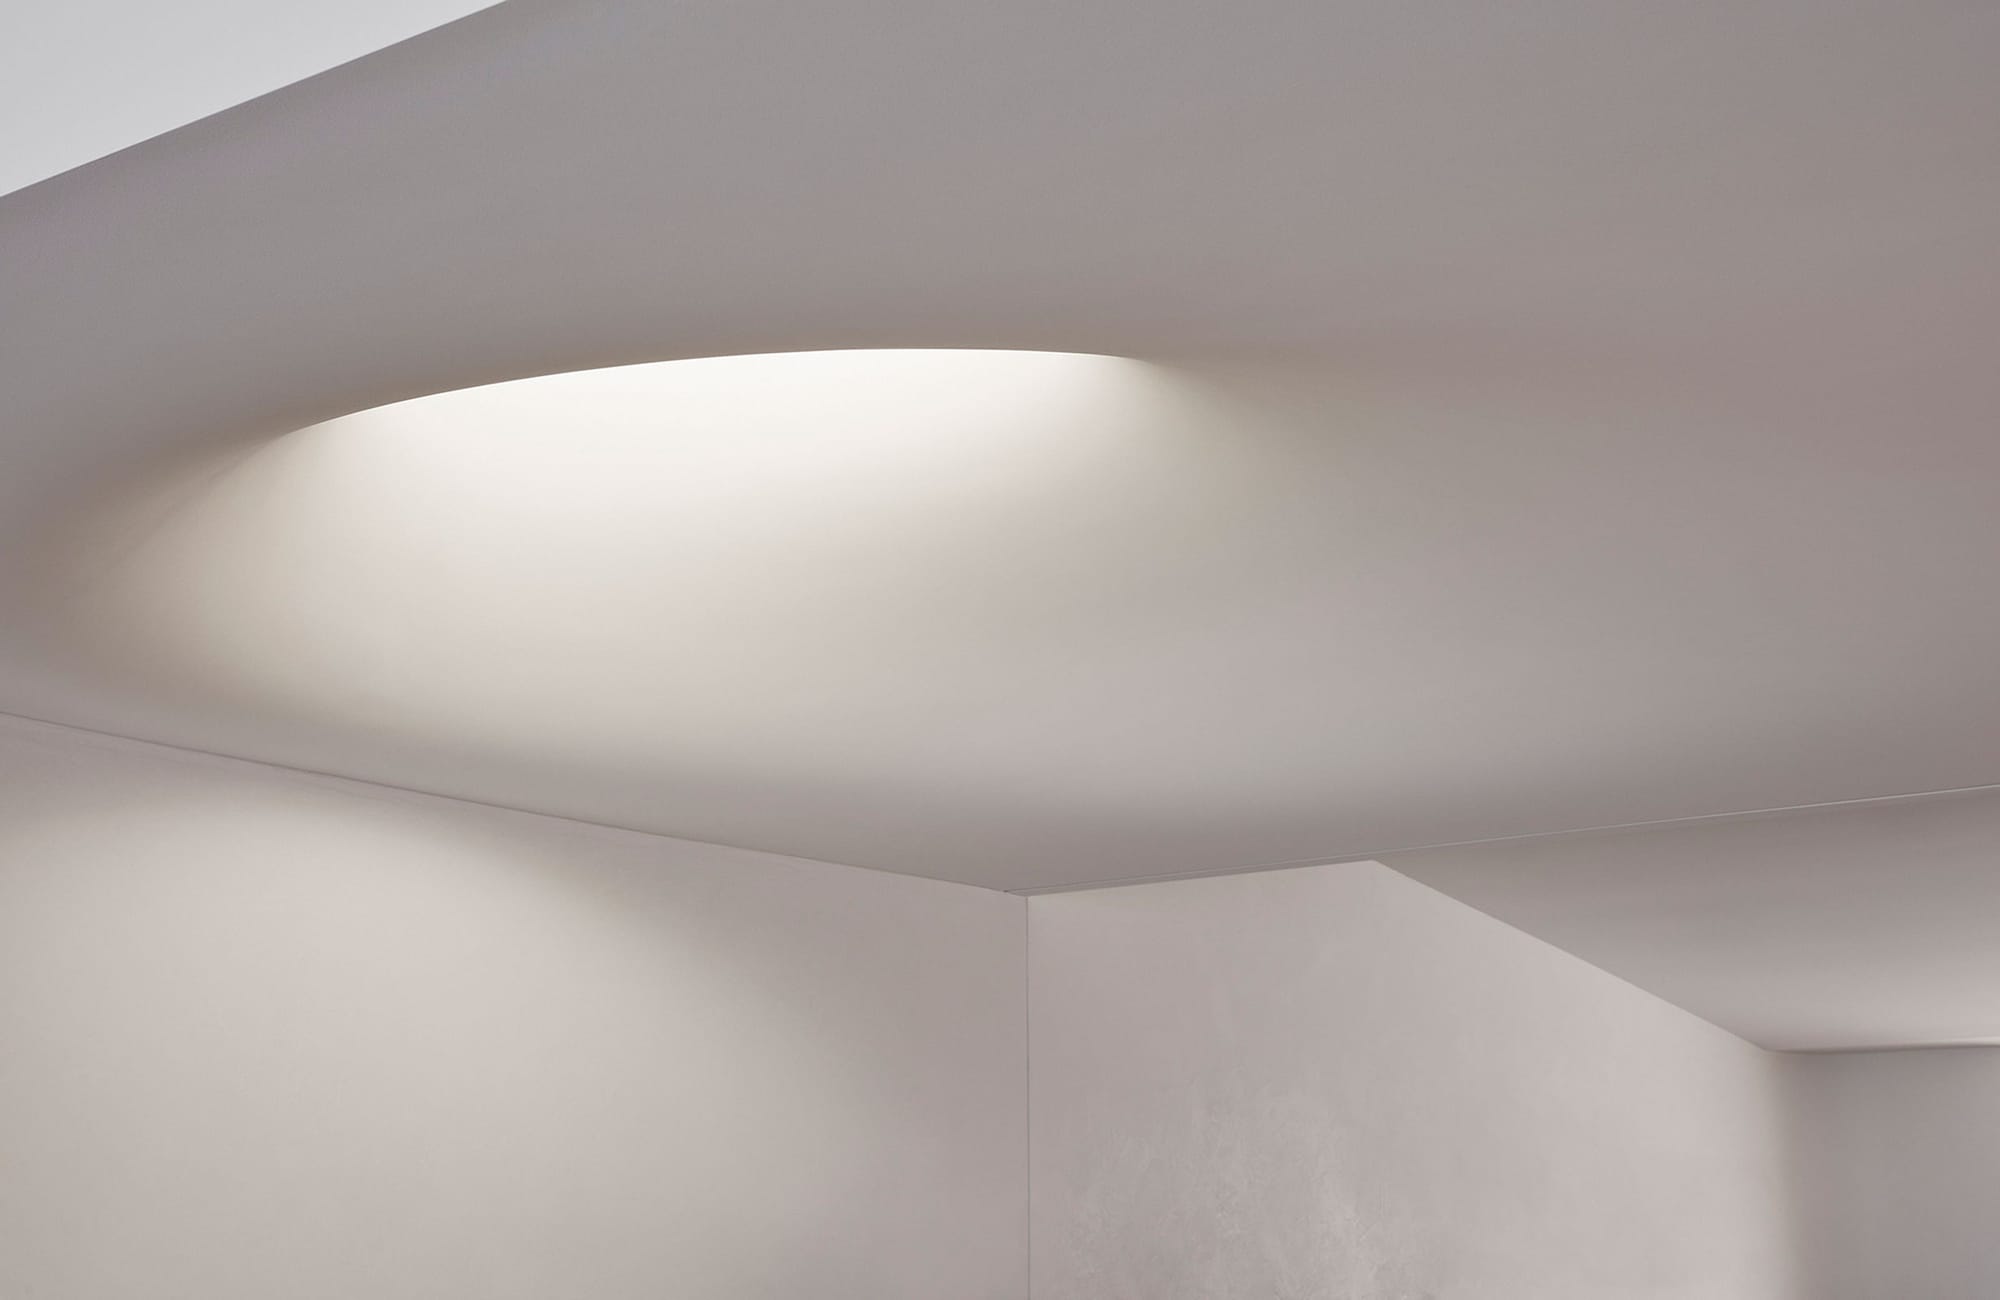 Arc Side by Jolson. Photography by Lucas Allen. Detail shot showing the curved plasterboard skylight above the feature staircase.